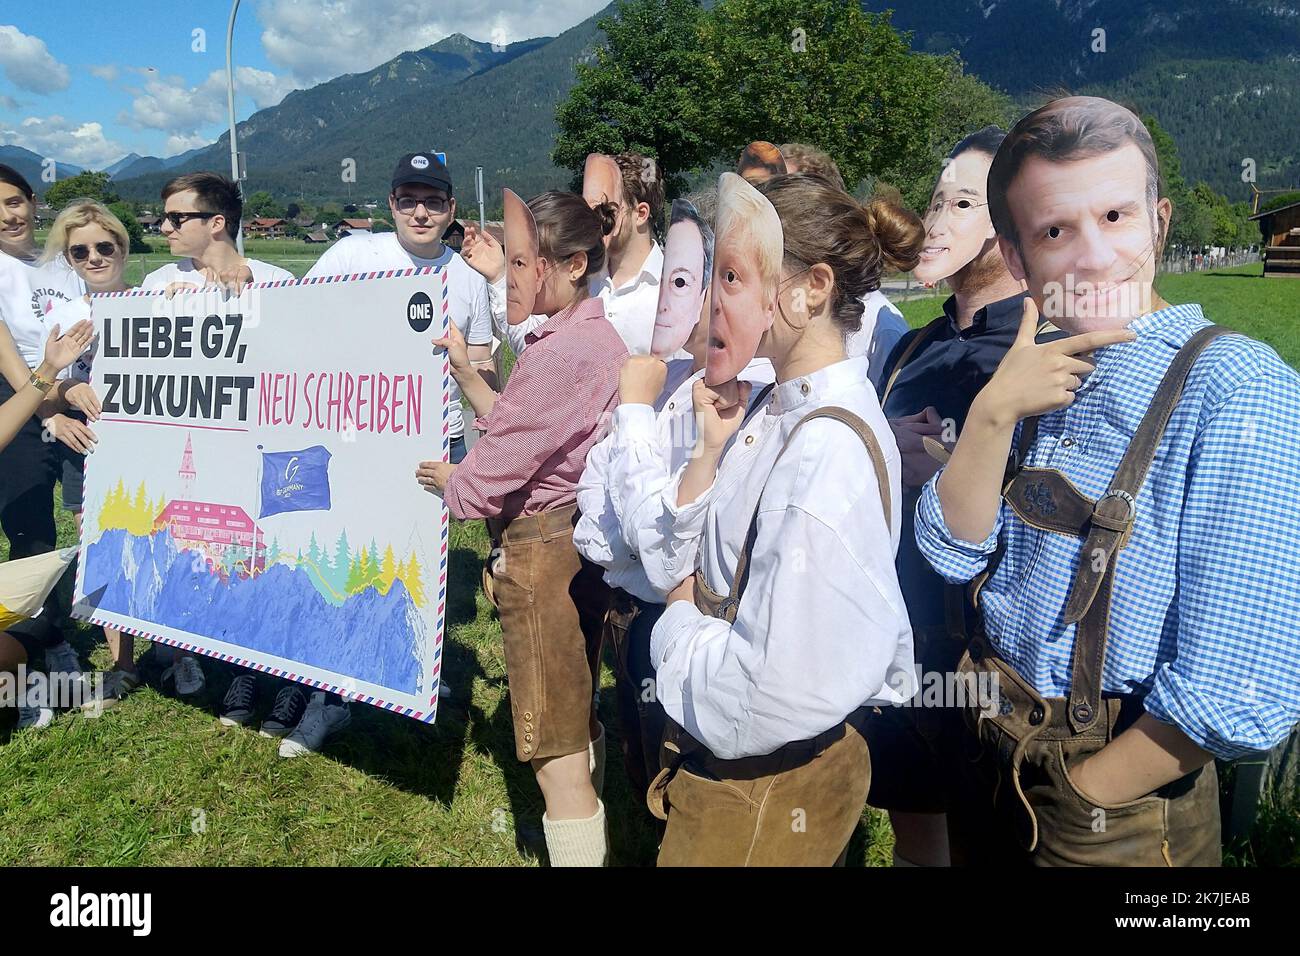 ©Pierre Teyssot/MAXPPP ; Activists from One (Bono) some wearing masks in the likeness of the leaders (Macron, Trudeau, Kishida, Johnson, Biden) of the G7 group of nations, demonstrate near the media centre prior to the G7 summit on June 25, 2022 in Garmisch-Partenkirchen, Germany. The G7 summit will run from June 26 till 28. . Â© Pierre Teyssot / Maxppp  Stock Photo